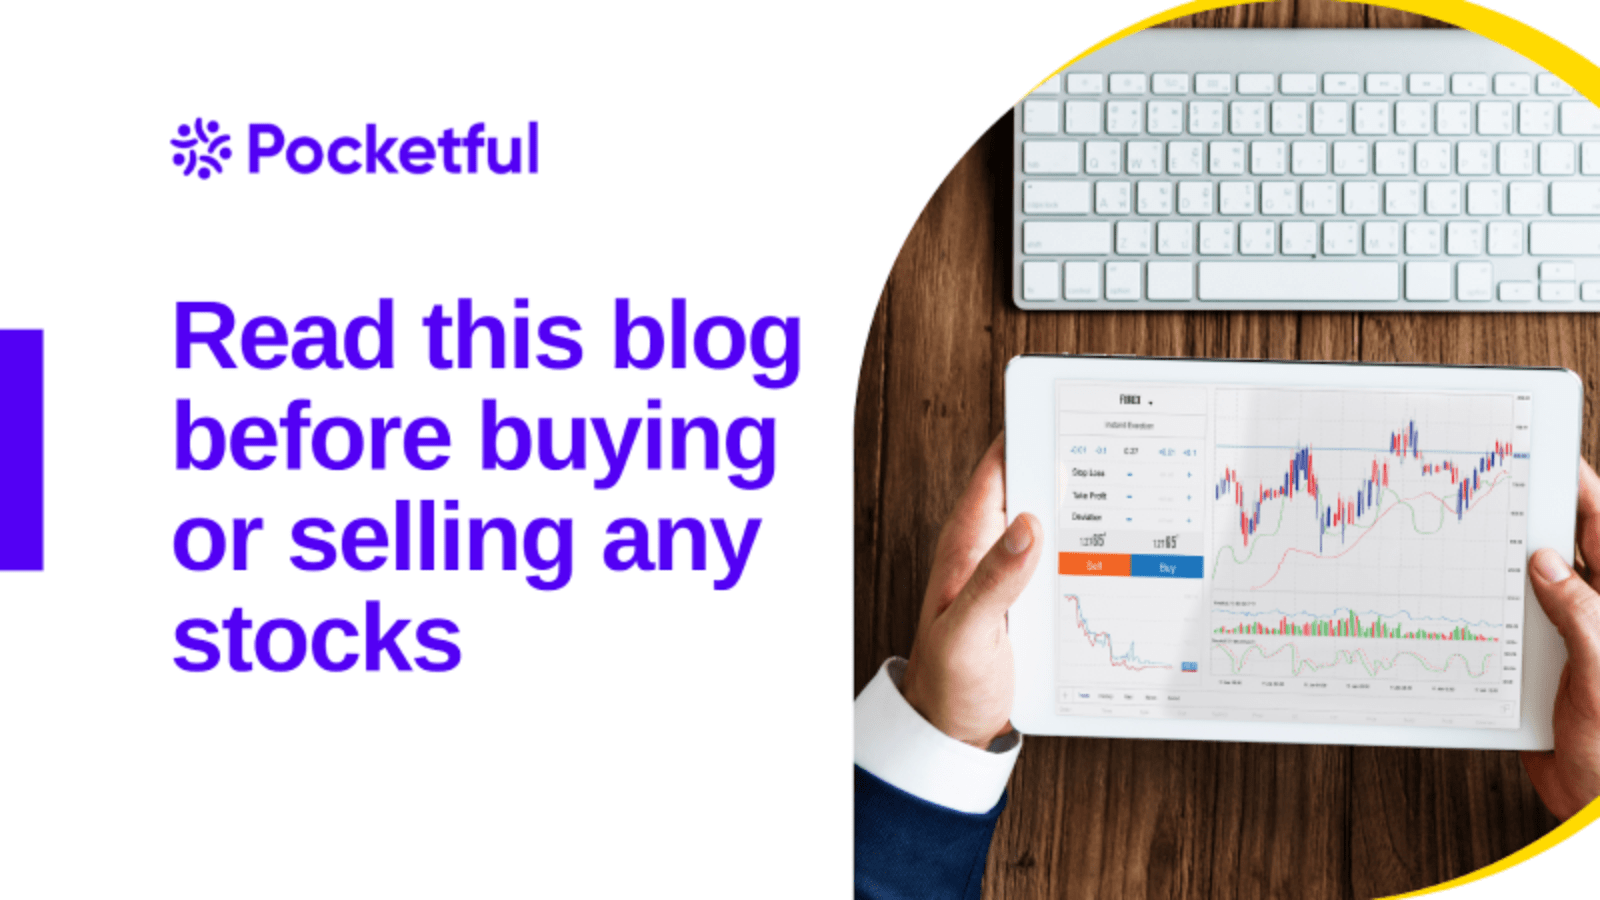 5 points to be considered before buying or selling any stocks